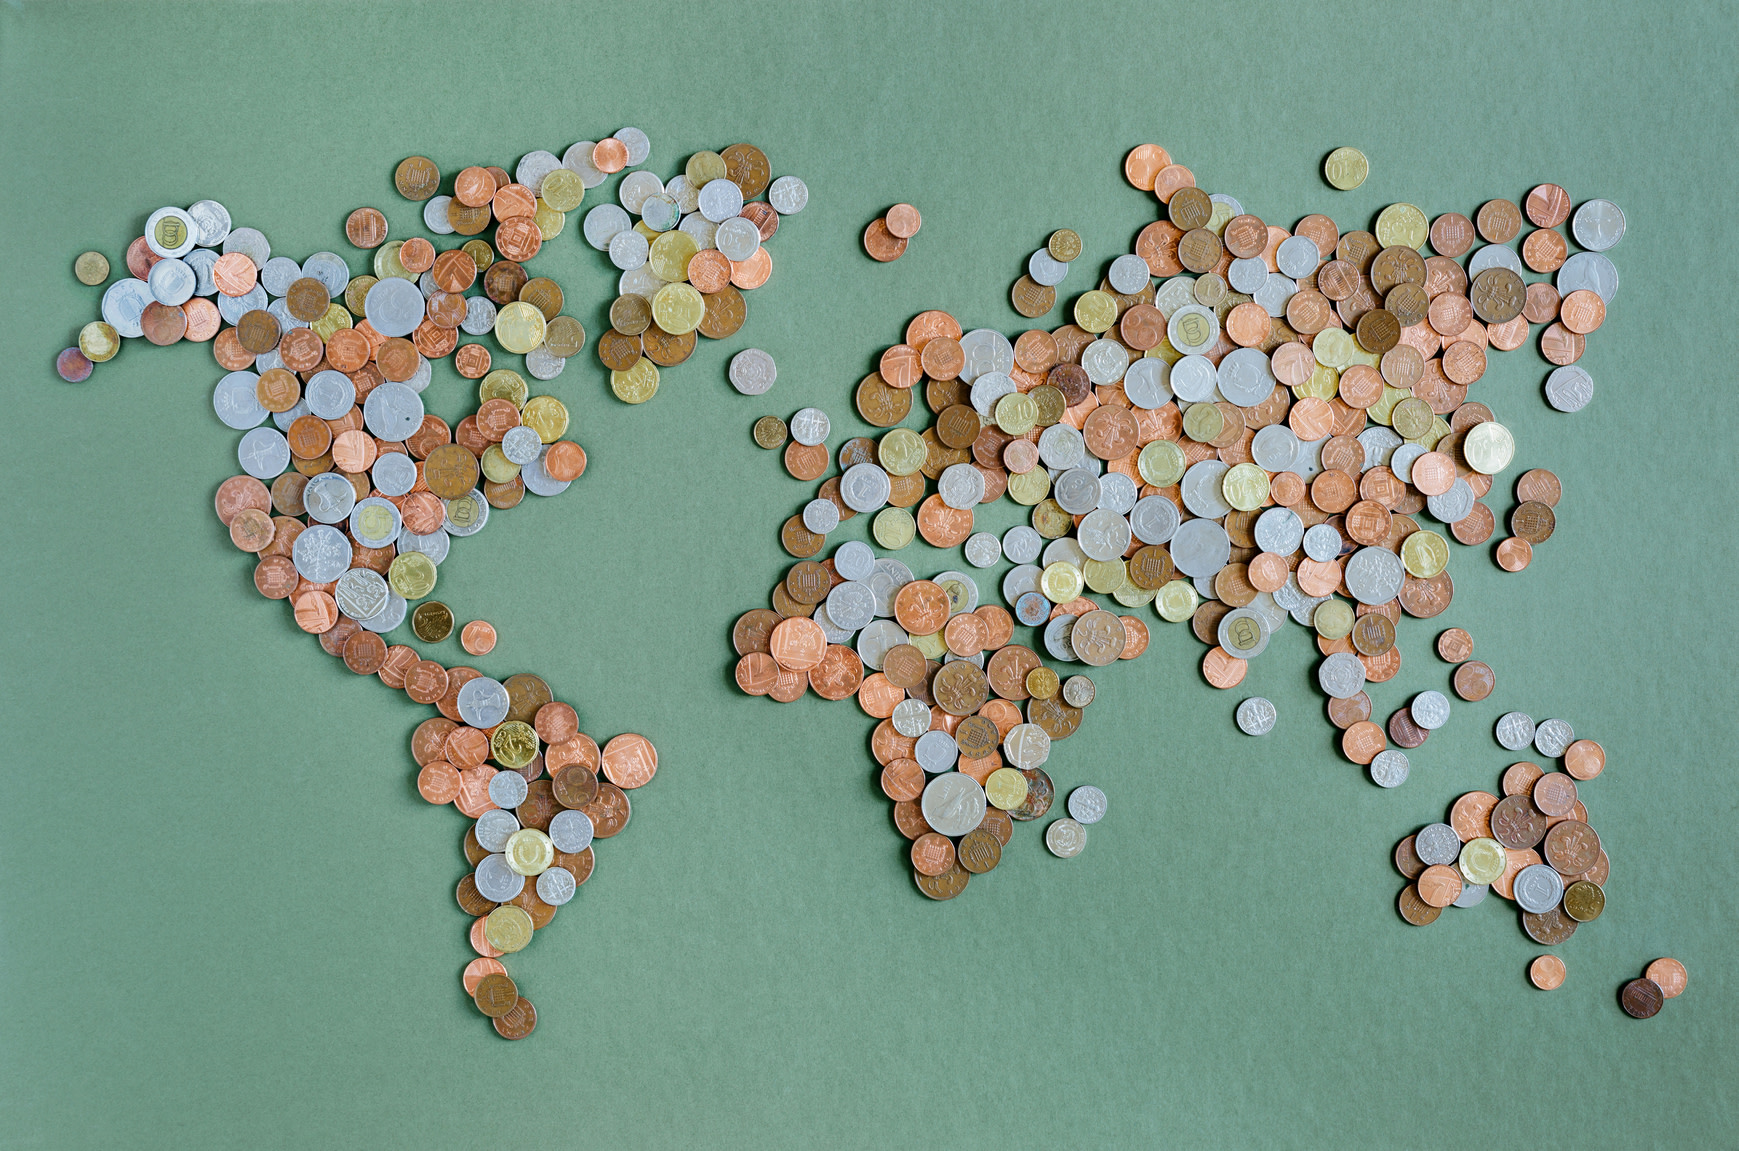 map of the world made with local coins.